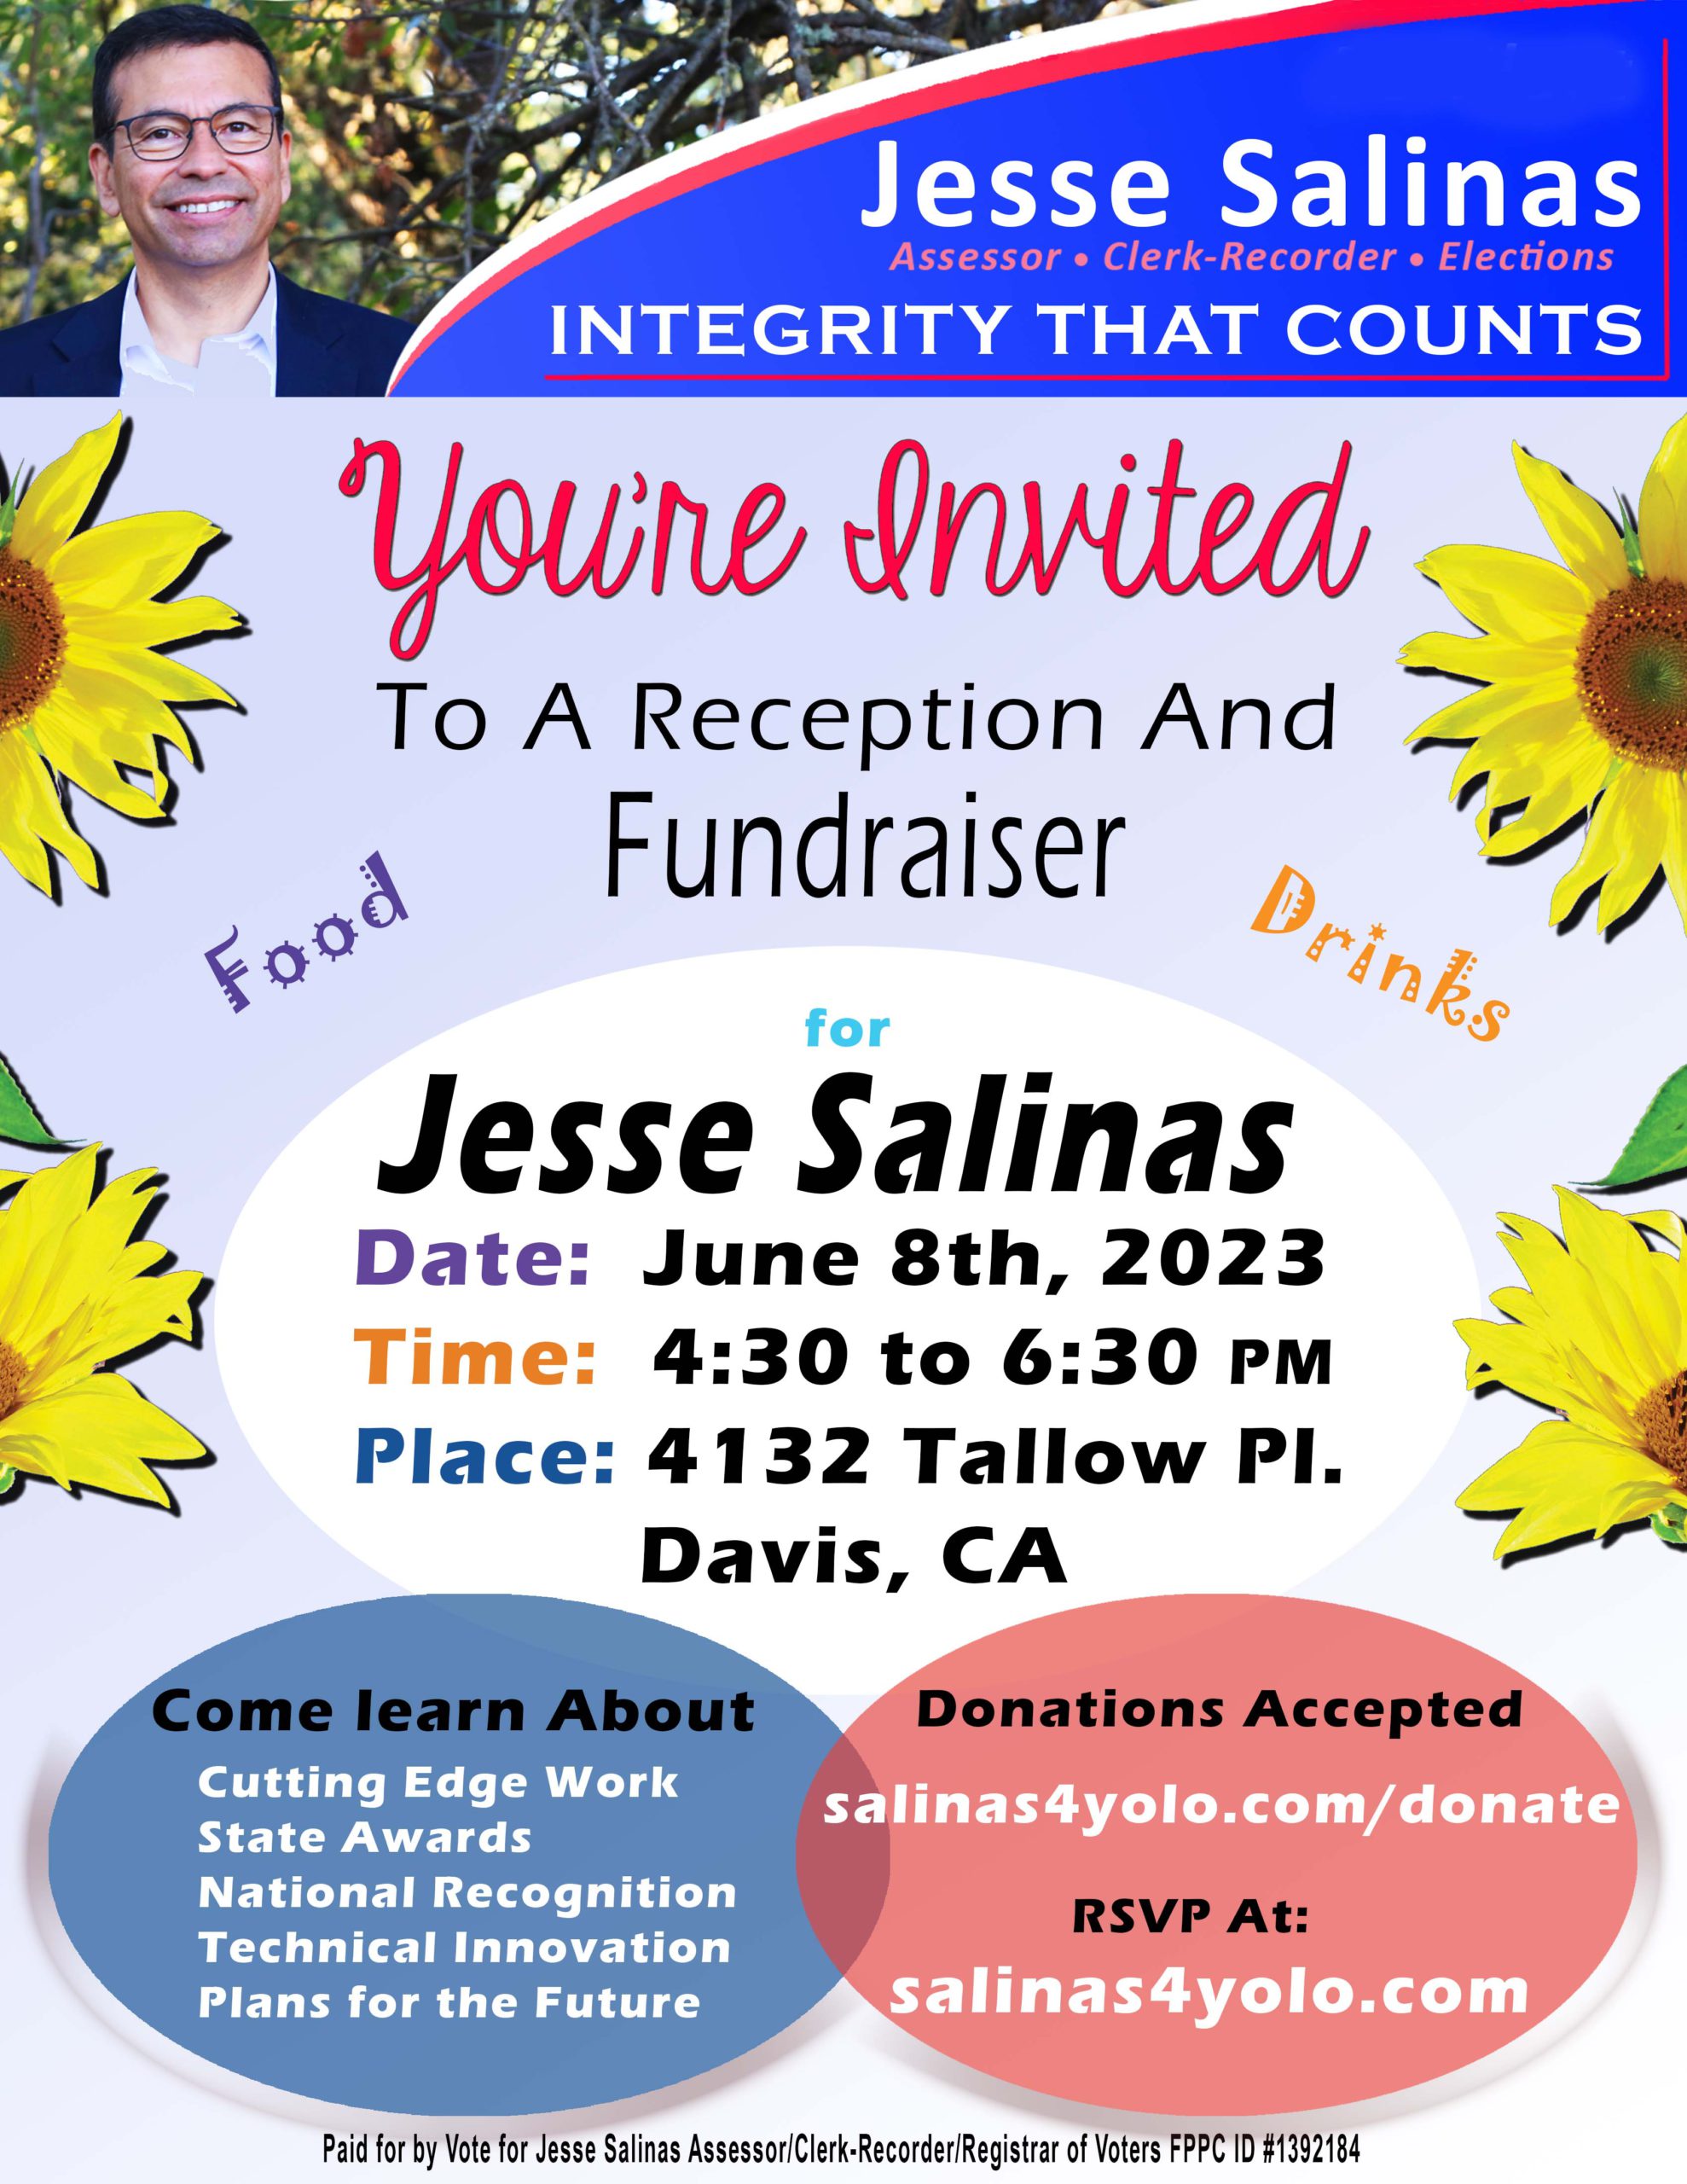 Fundraiser for Jesse Salinas, Date: June 8th, 2023, Time: 4:30 to 6:30 PM, Place: Davis, California